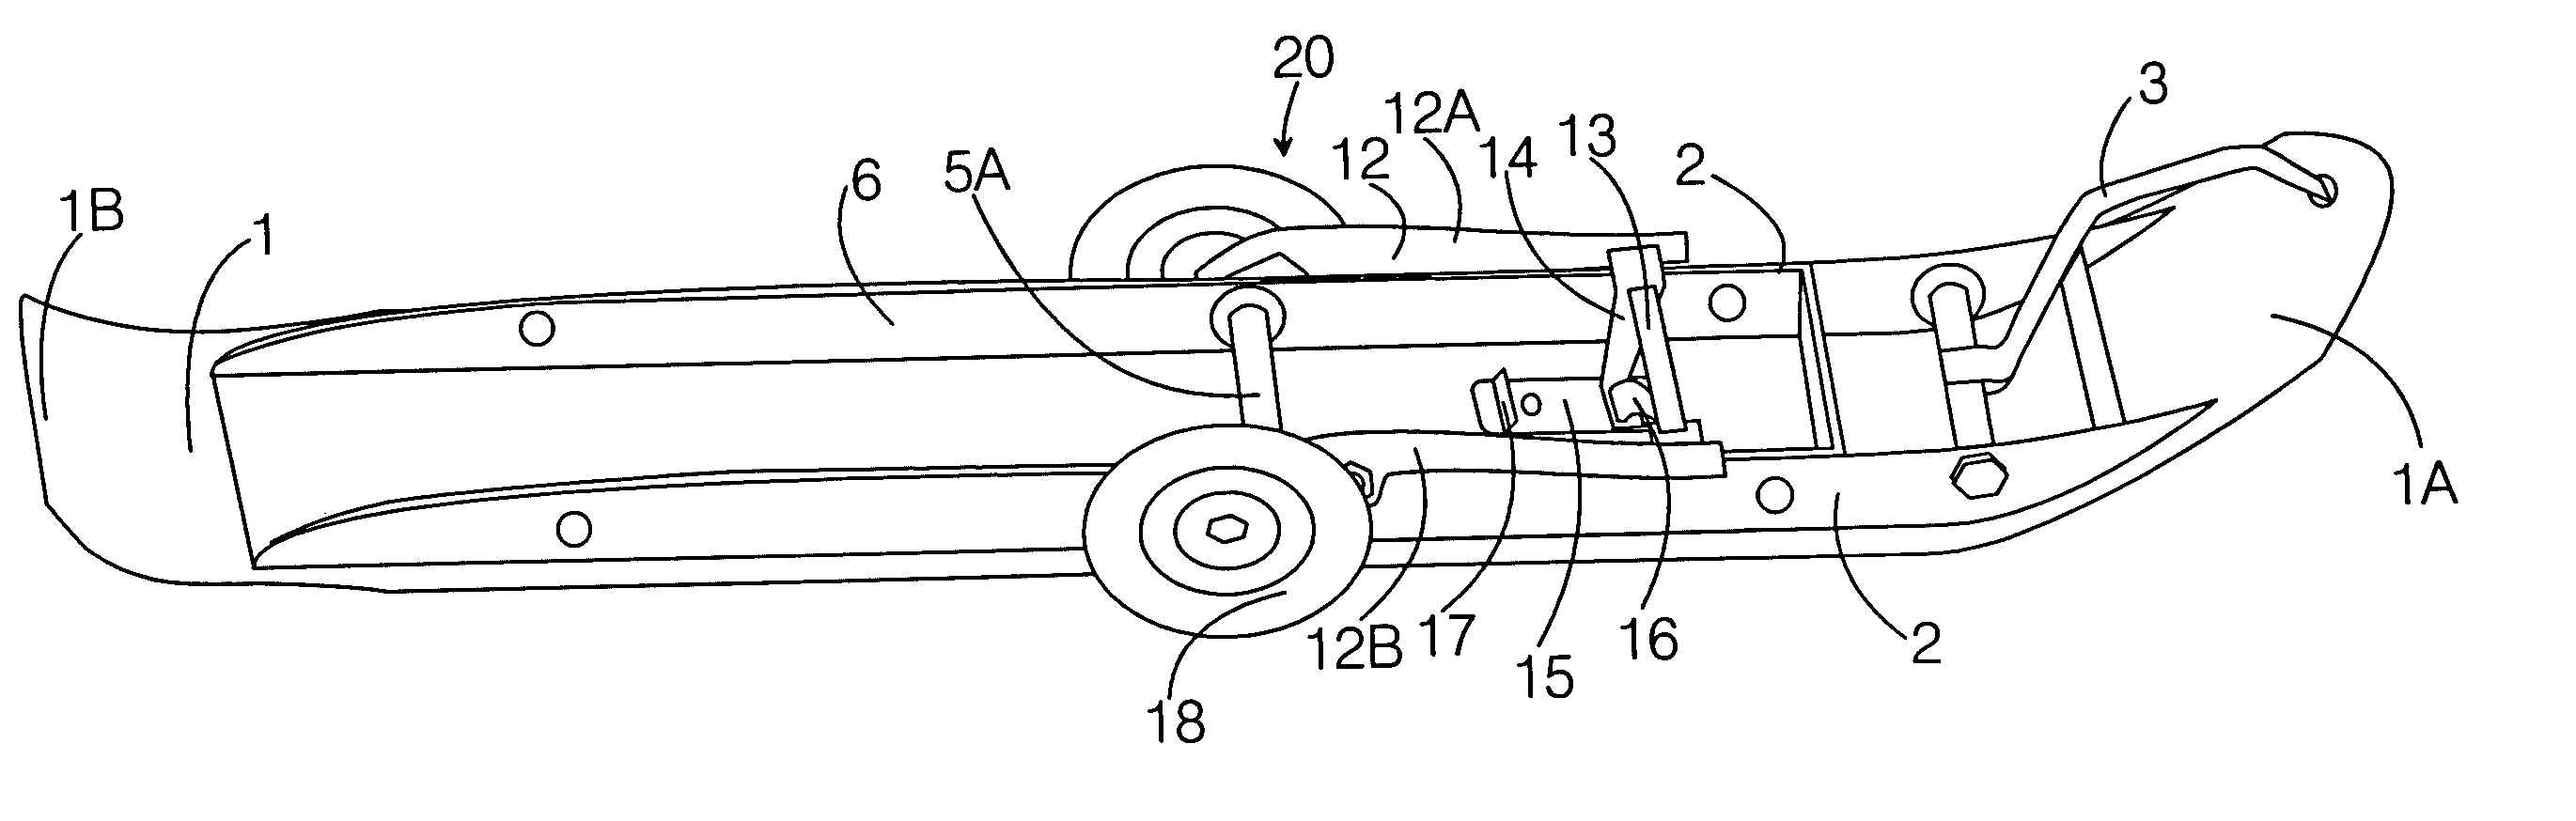 Convertible ski-supported vehicle